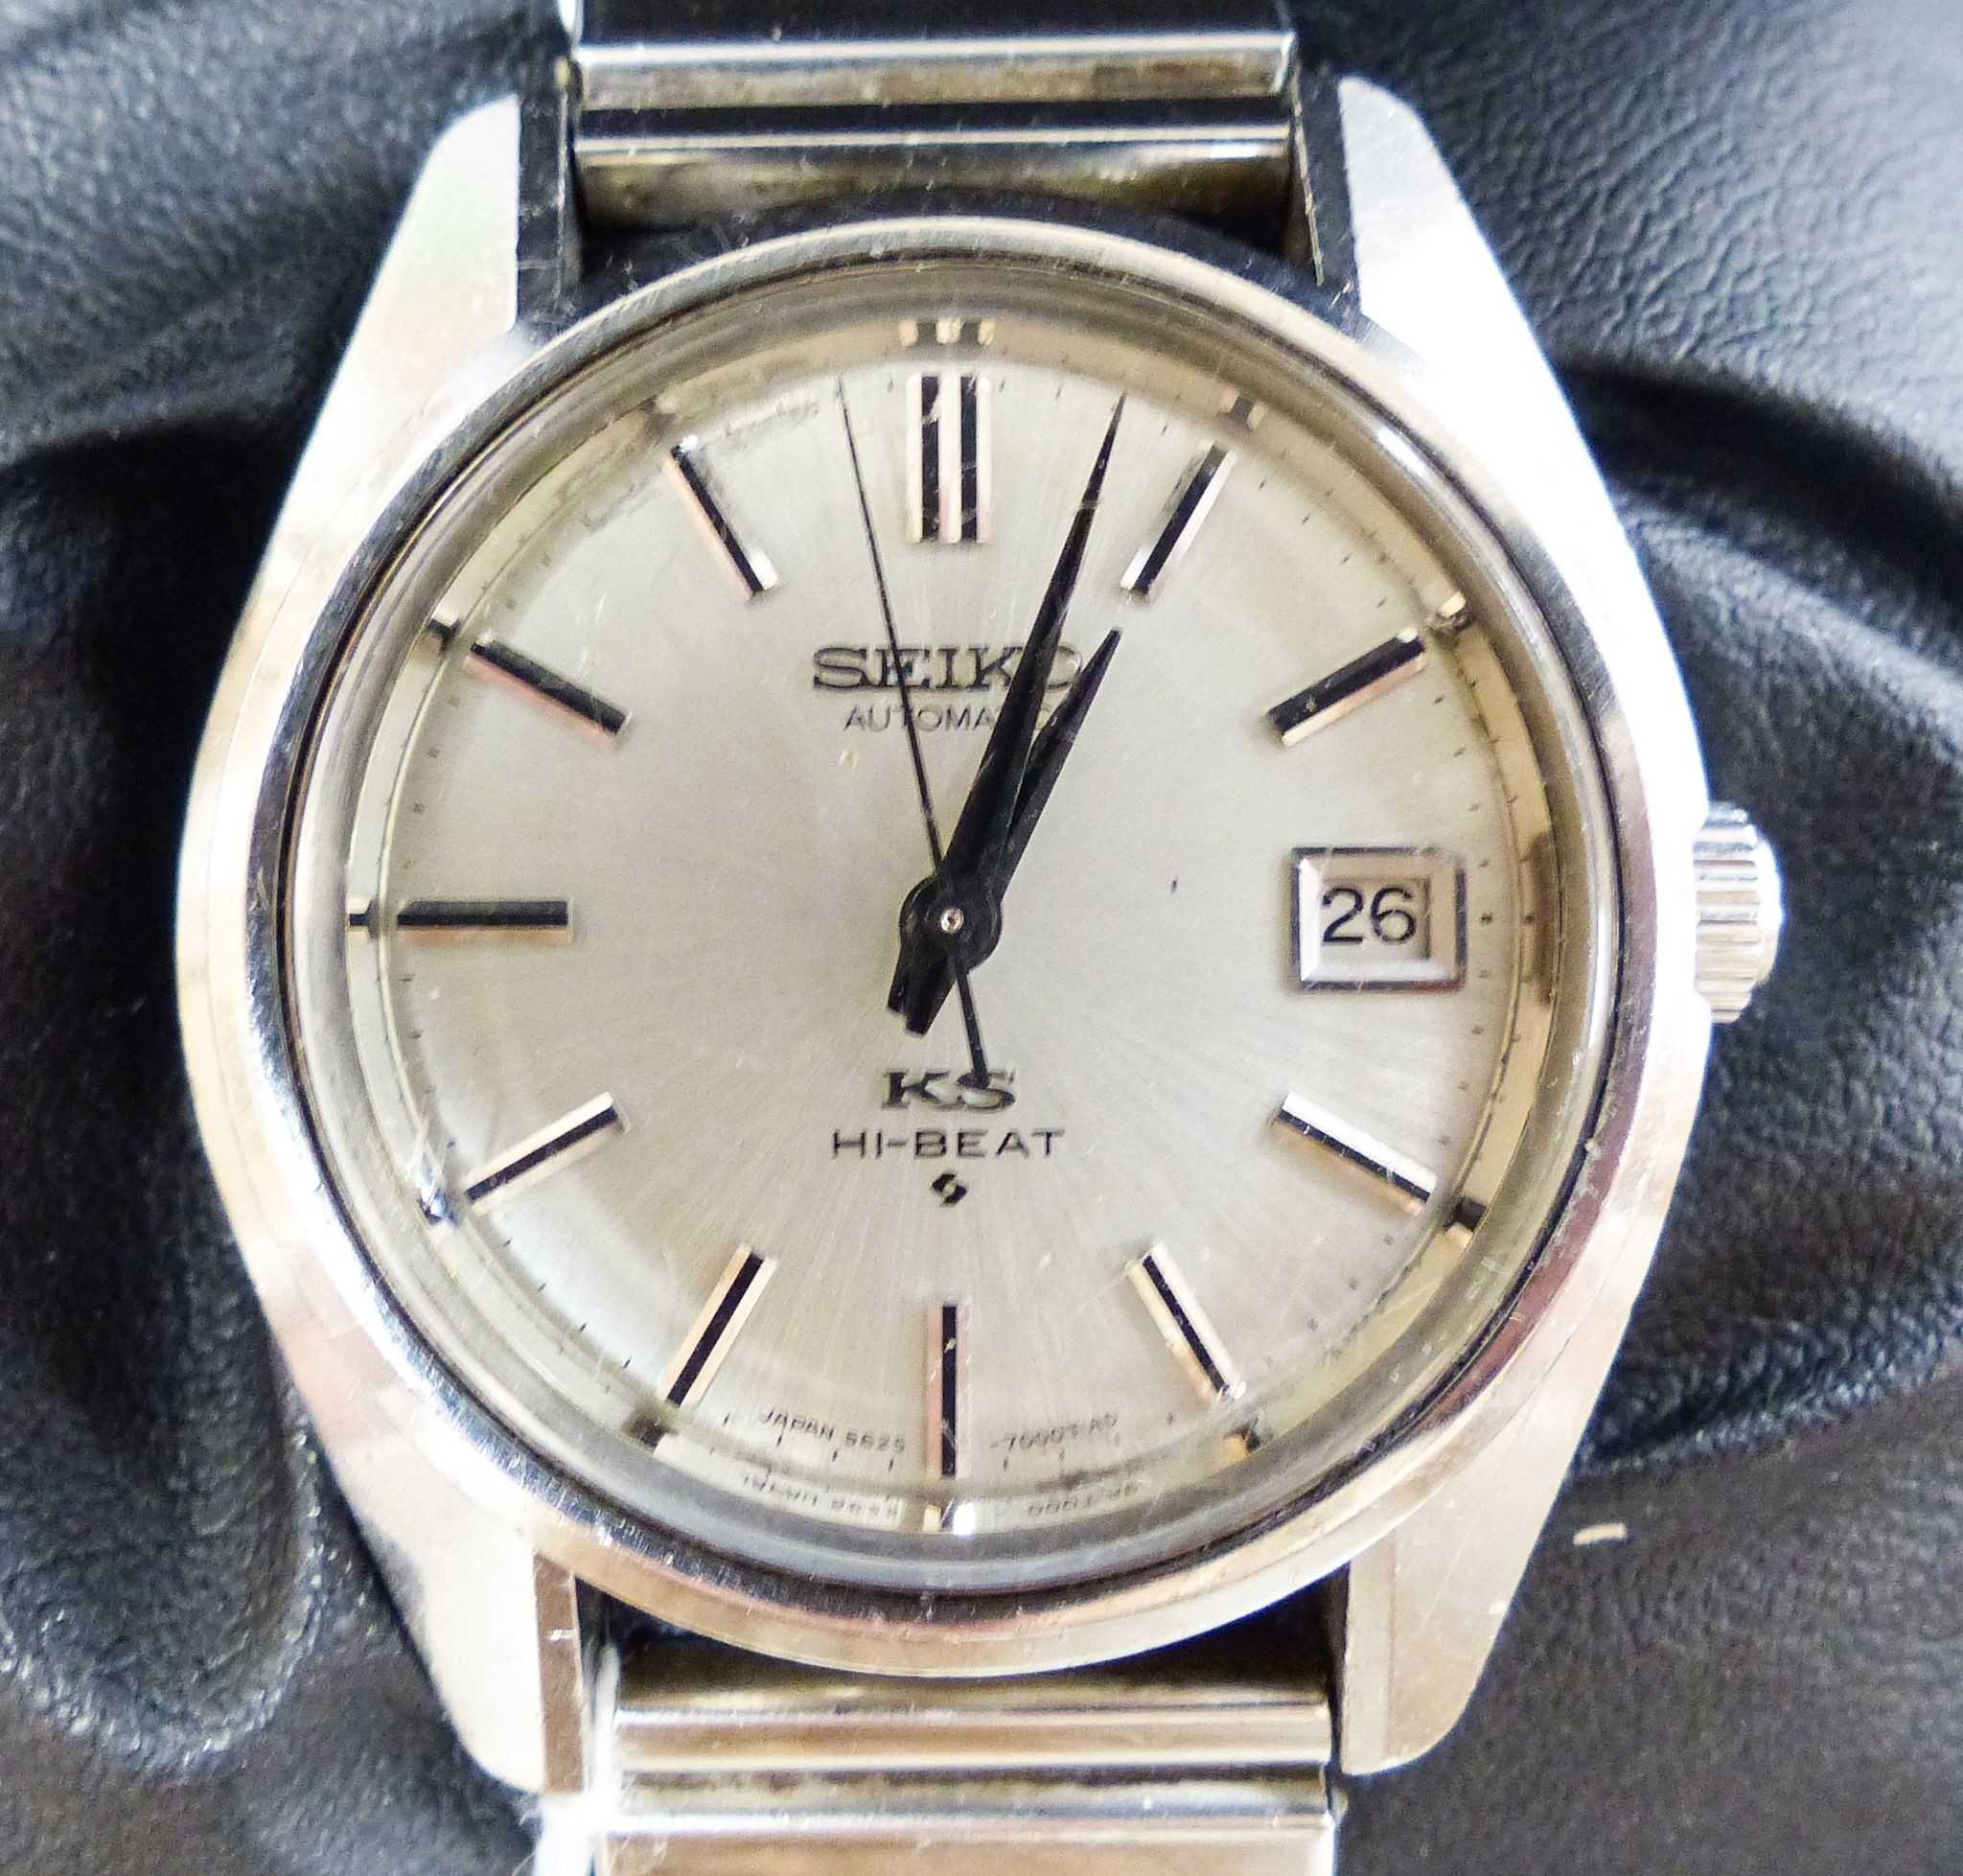 A gentleman's 1970's stainless steel King Seiko Hi-Beat chronometer automatic wrist watch, on associated strap, model 5625 7000, with date aperture, case diameter 36mm, with box.